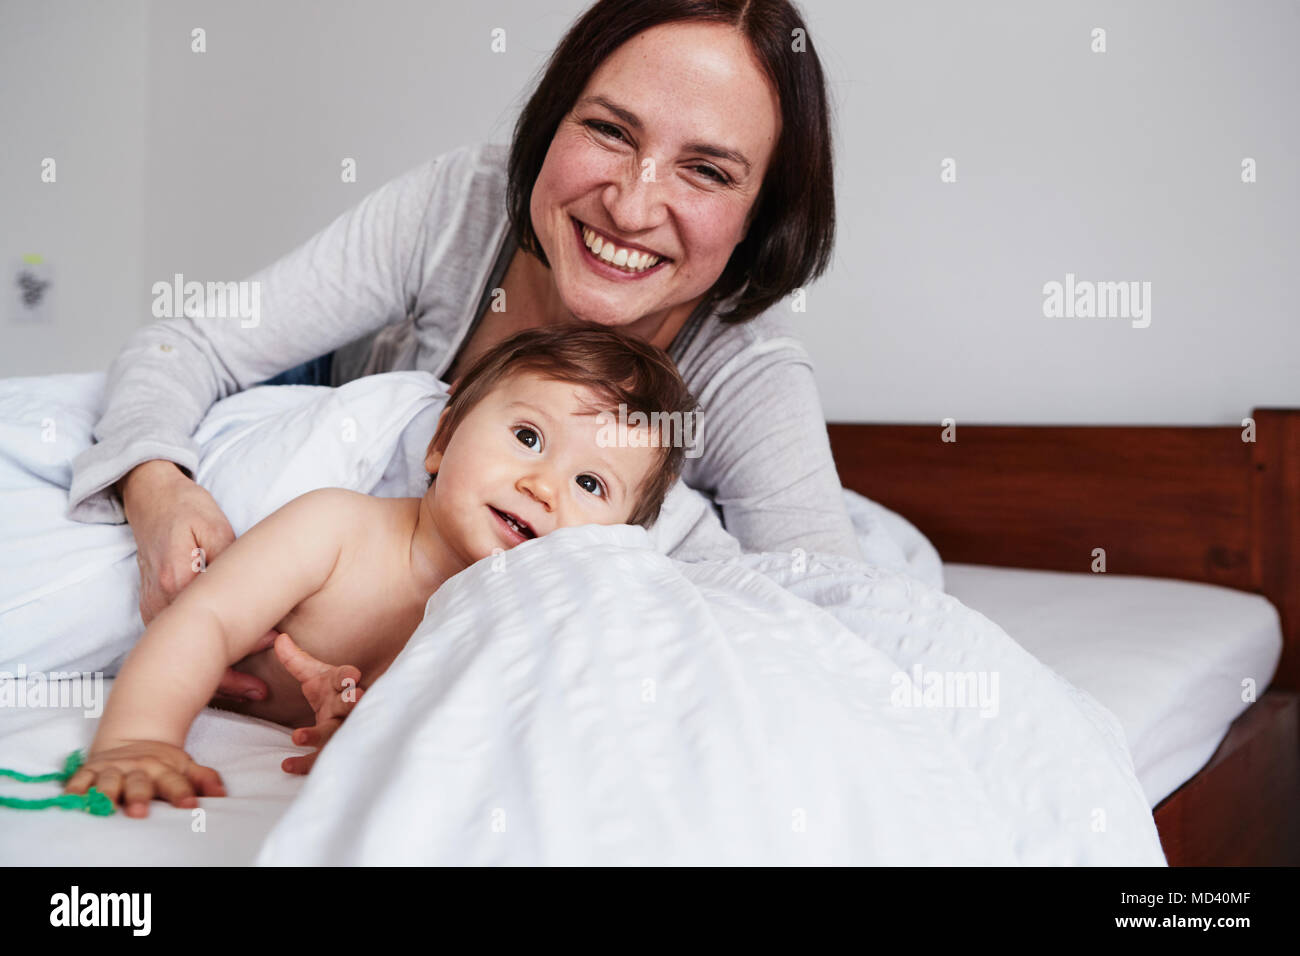 Mother and baby daughter relaxing on bed, smiling Stock Photo